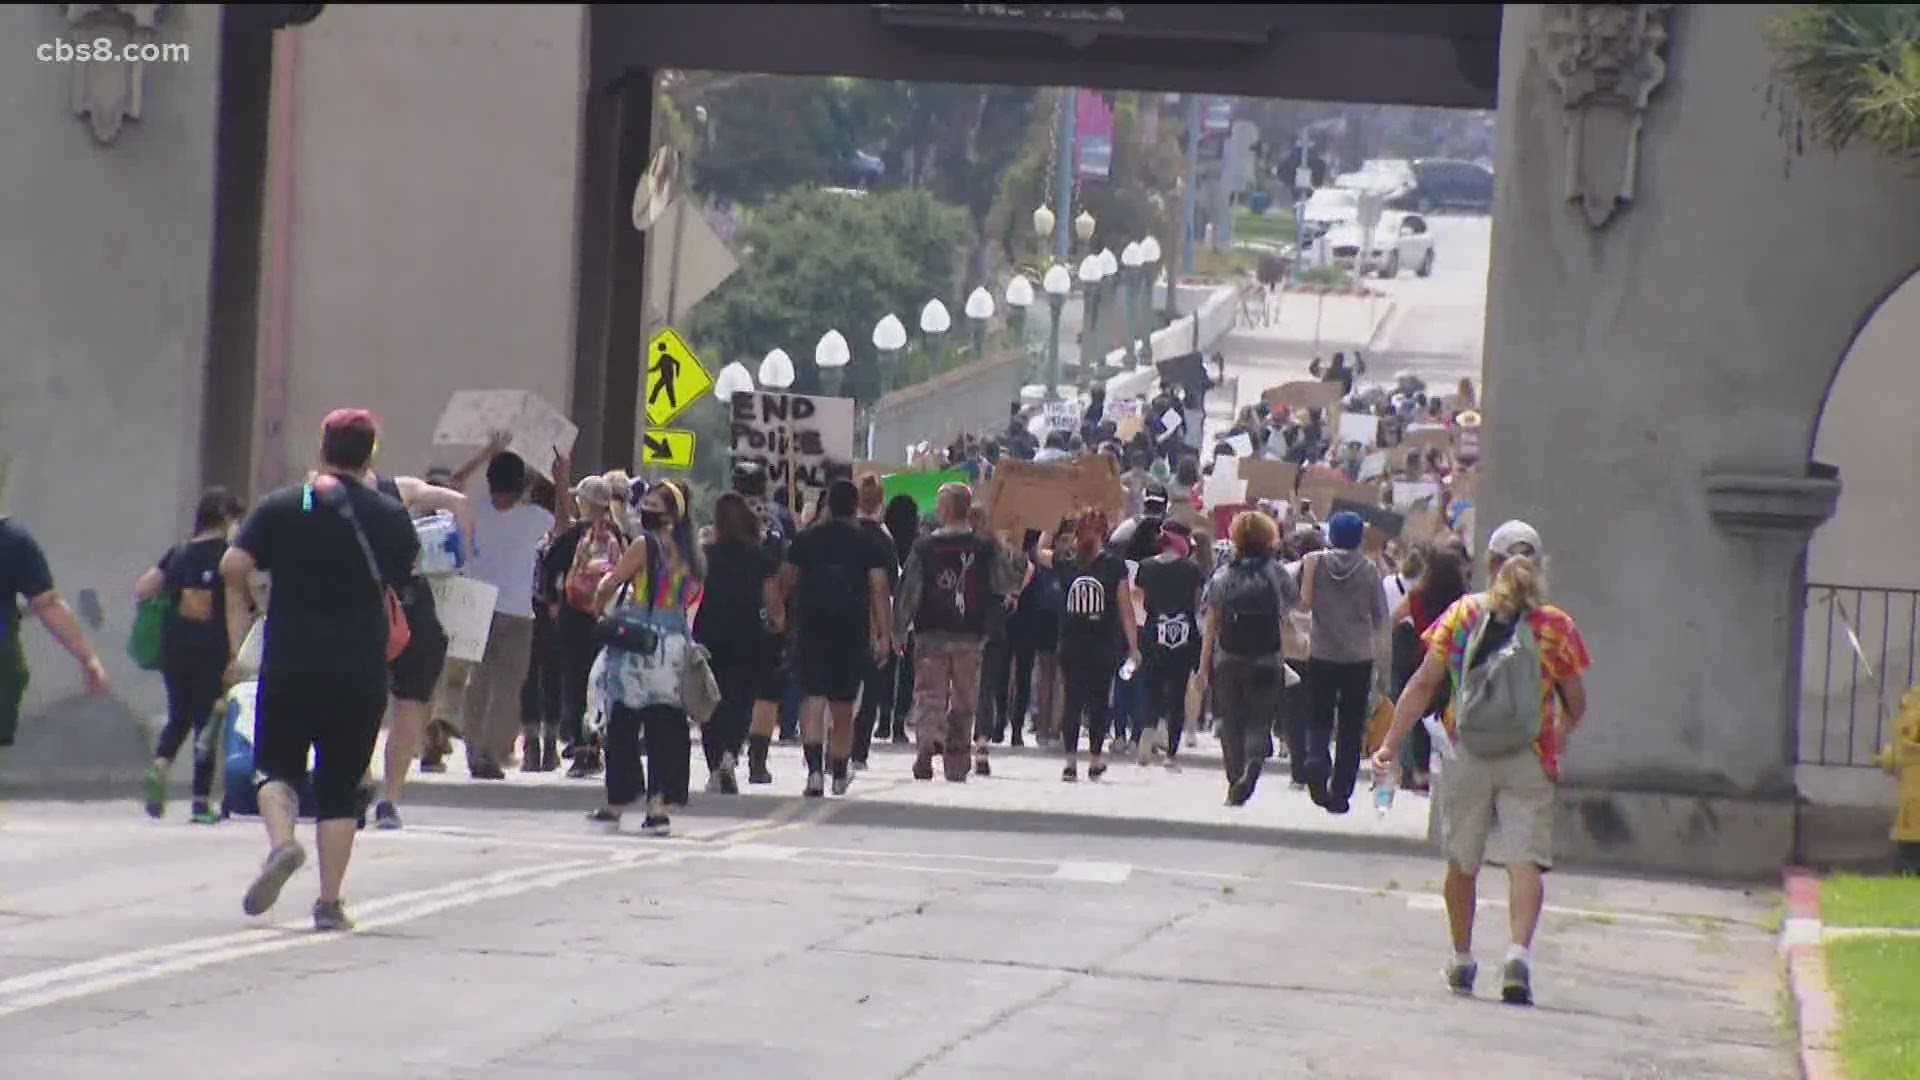 Balboa Park protesters chanted to police "march with us" while passing a group of officers along El Prado as they made their way toward the Cabrillo Bridge.